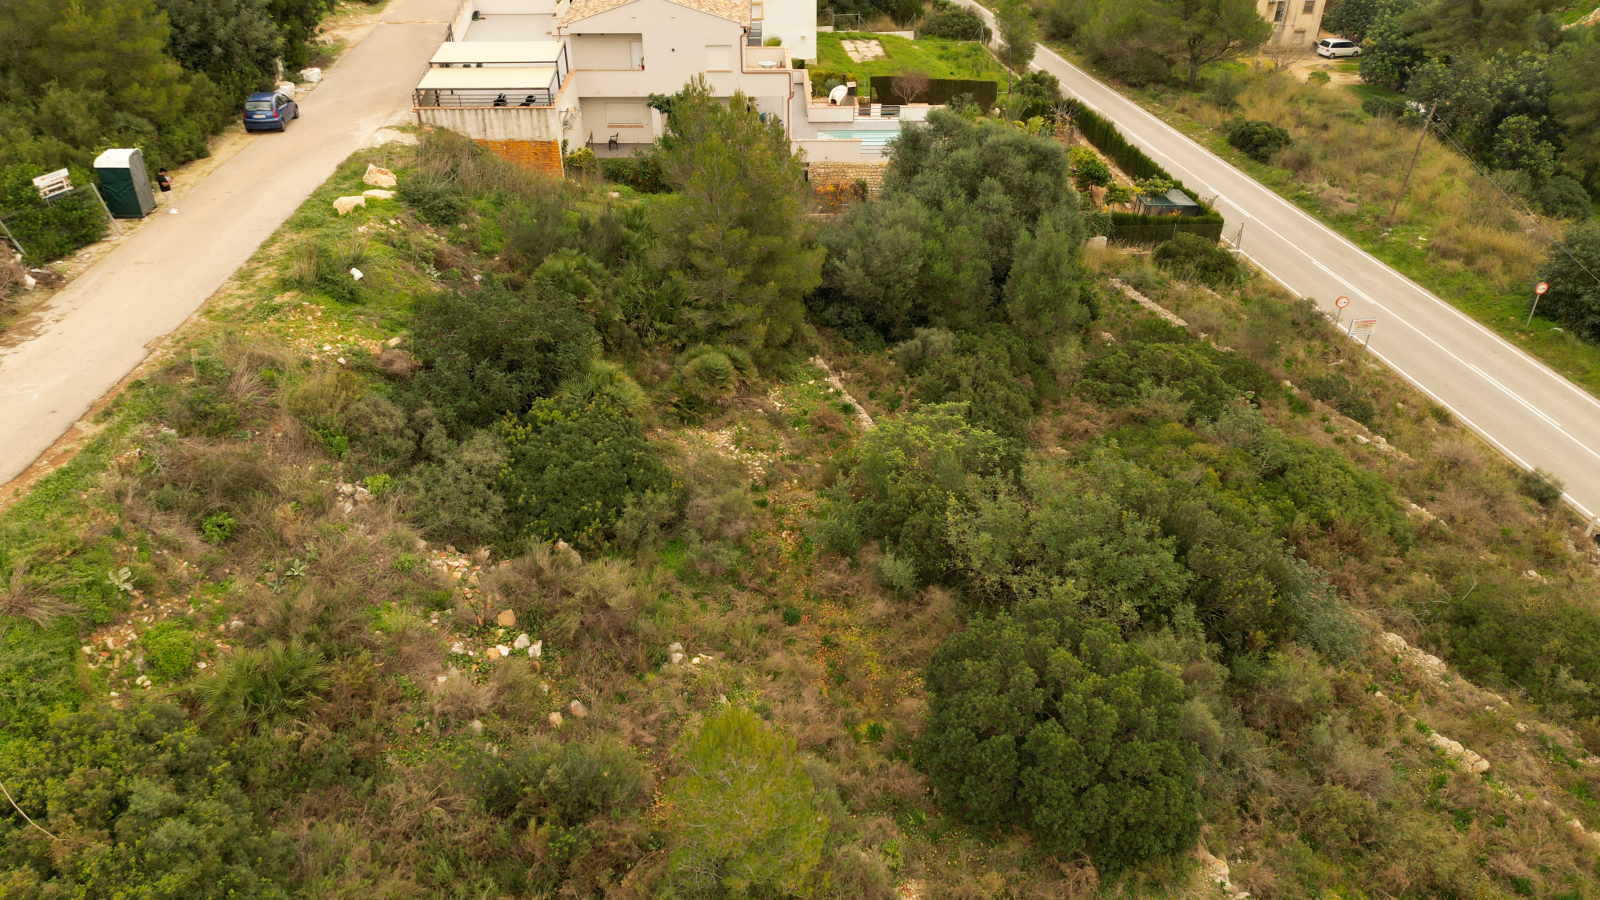 Ideal plot with panoramic views near the town center